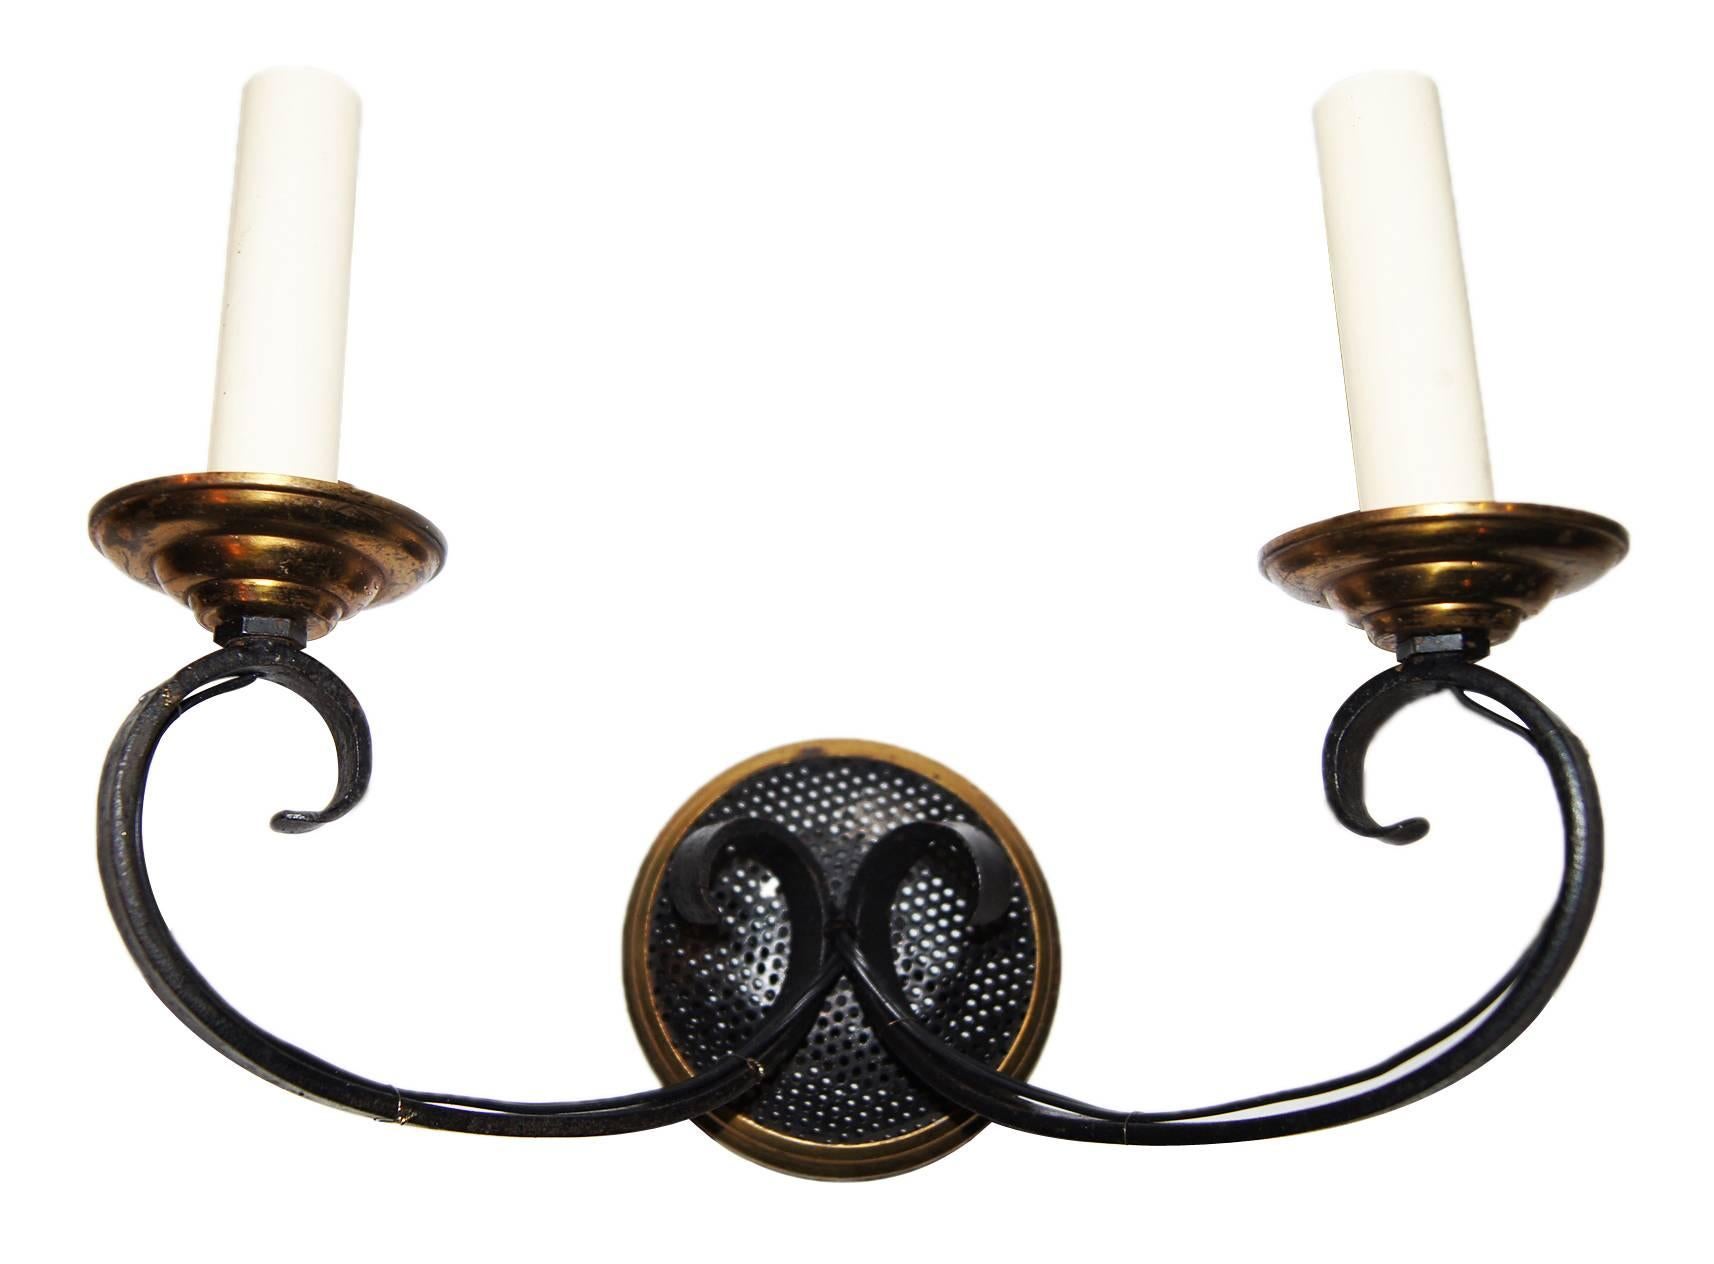 Pair of 1940s French Moderne style double-light sconces with original patina. Brass and black body.

Measurements:
10.5